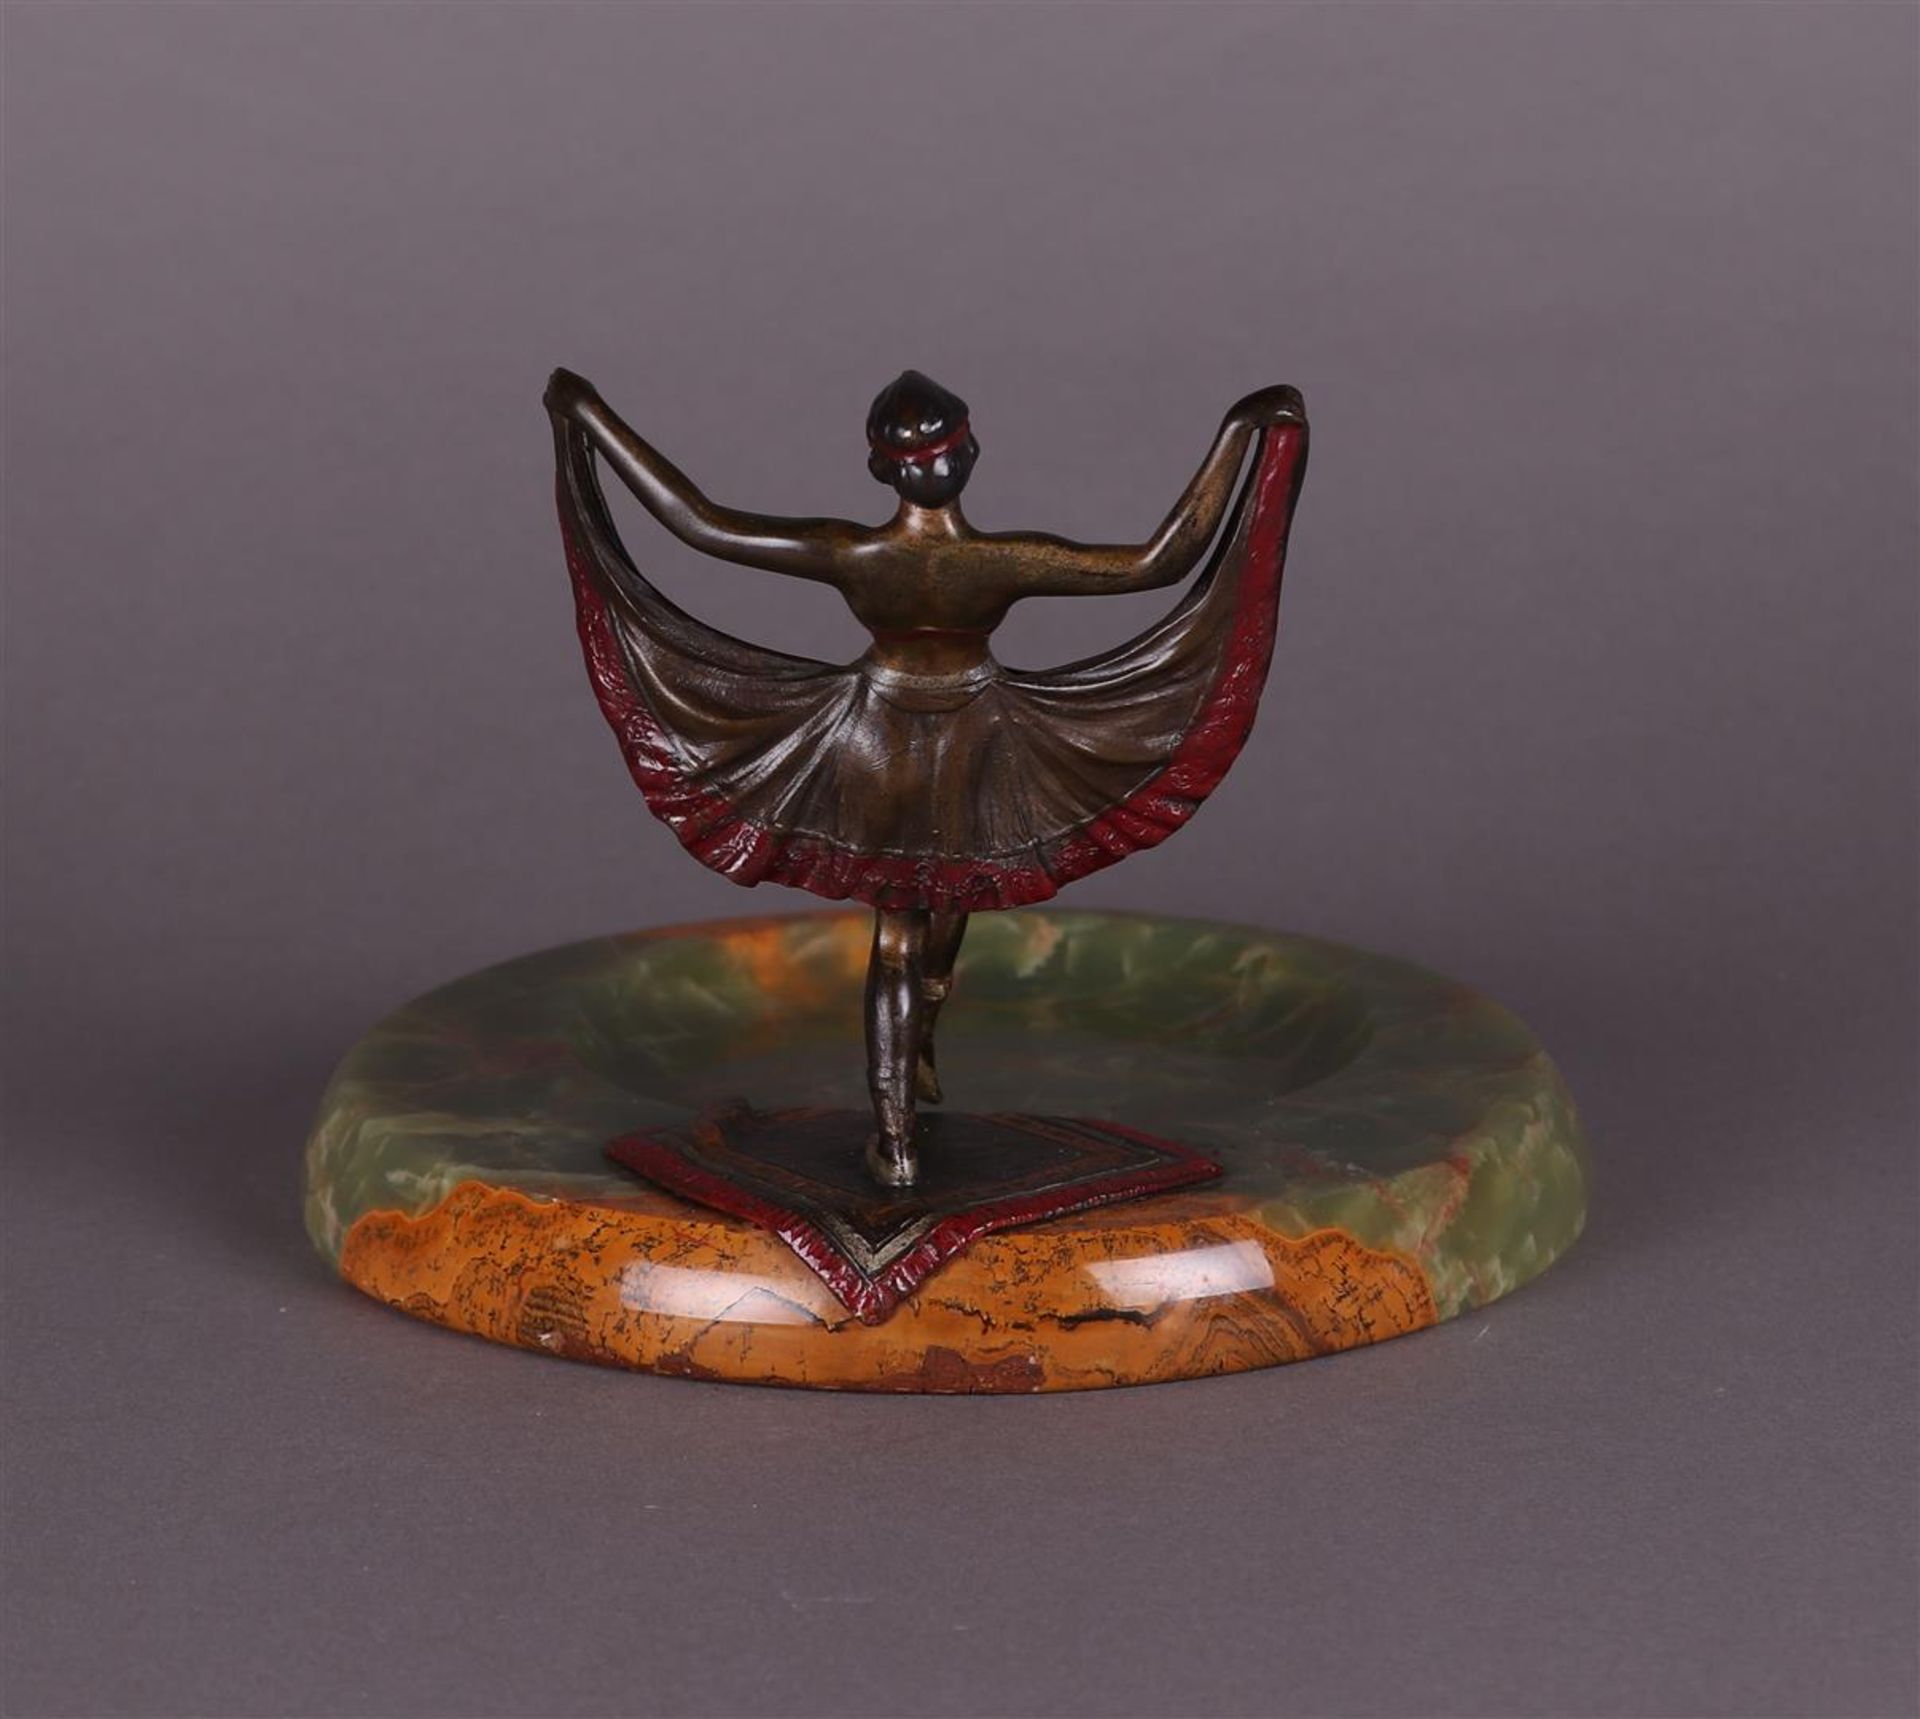 A cold-painted erotic "Viennese" bronze of a belly dancer on a marble dish (vide poche). Marked "Aus - Bild 3 aus 3